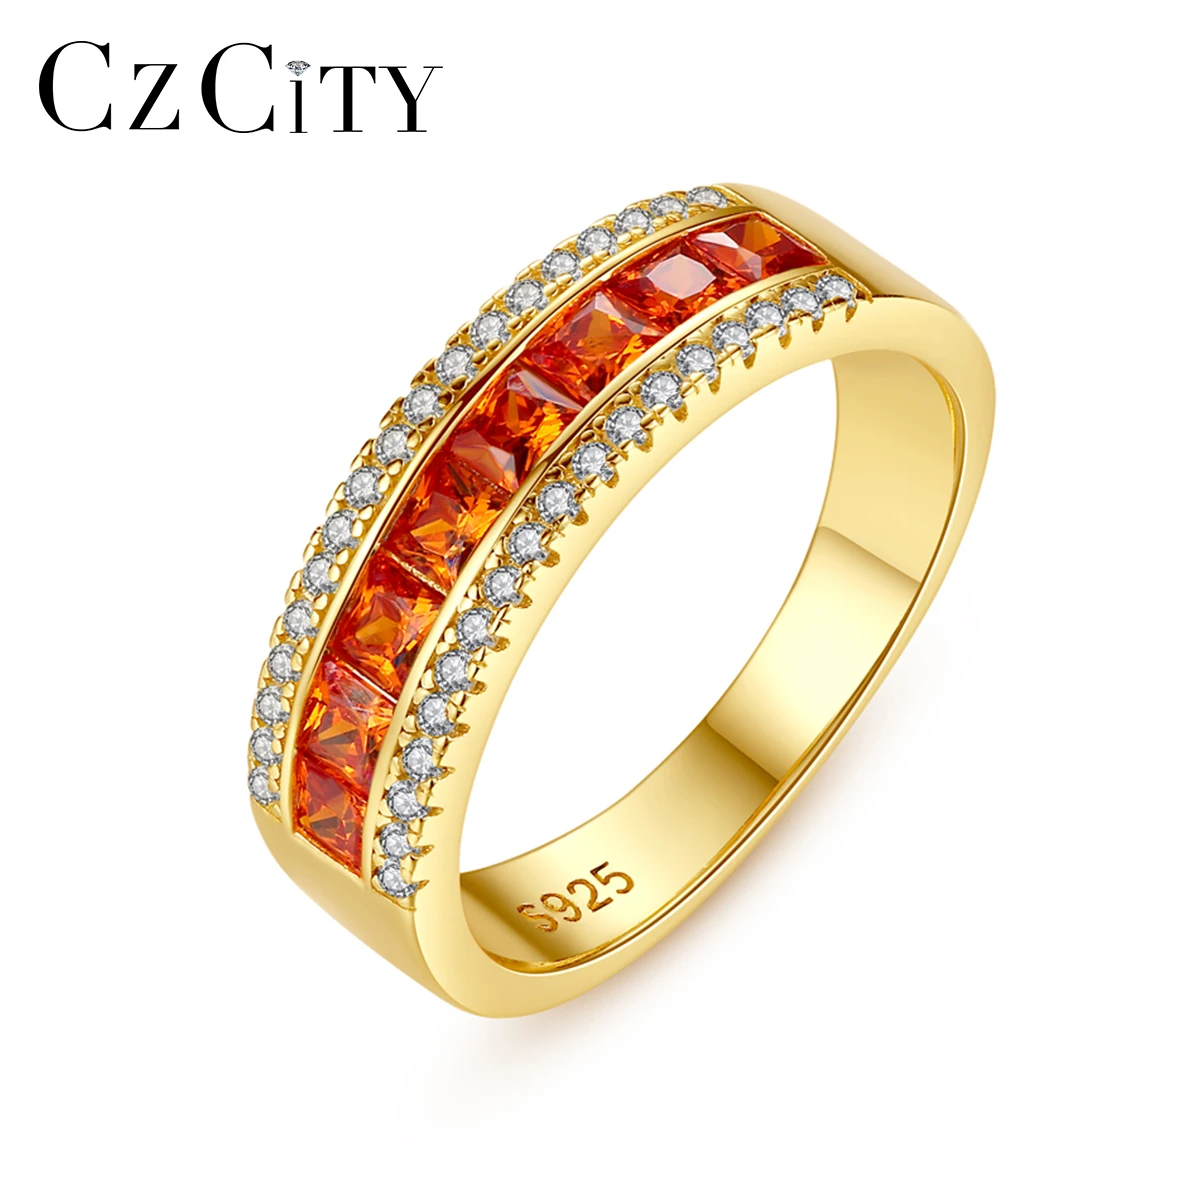 

CZCITY Orange Cutting Topaz 925 Silver Sterling Rings for Women Tiny Sparkling CZ Paved Fine Jewelry Luxury Red Gemstone Gifts